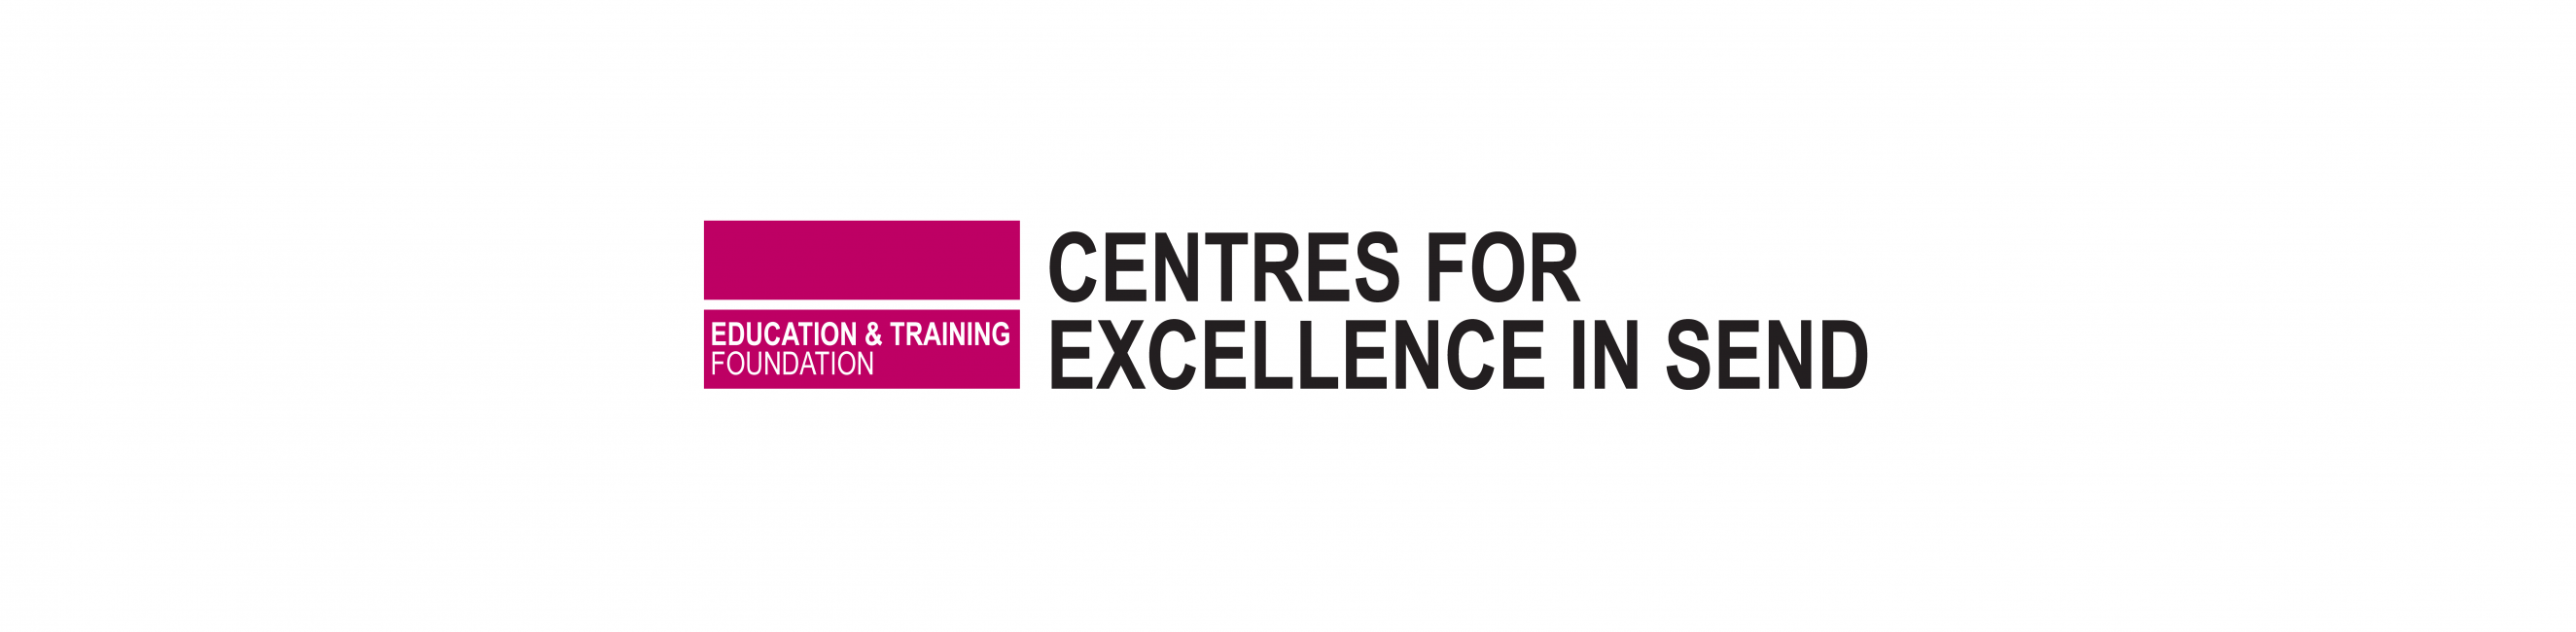 Centres for Excellence in SEND